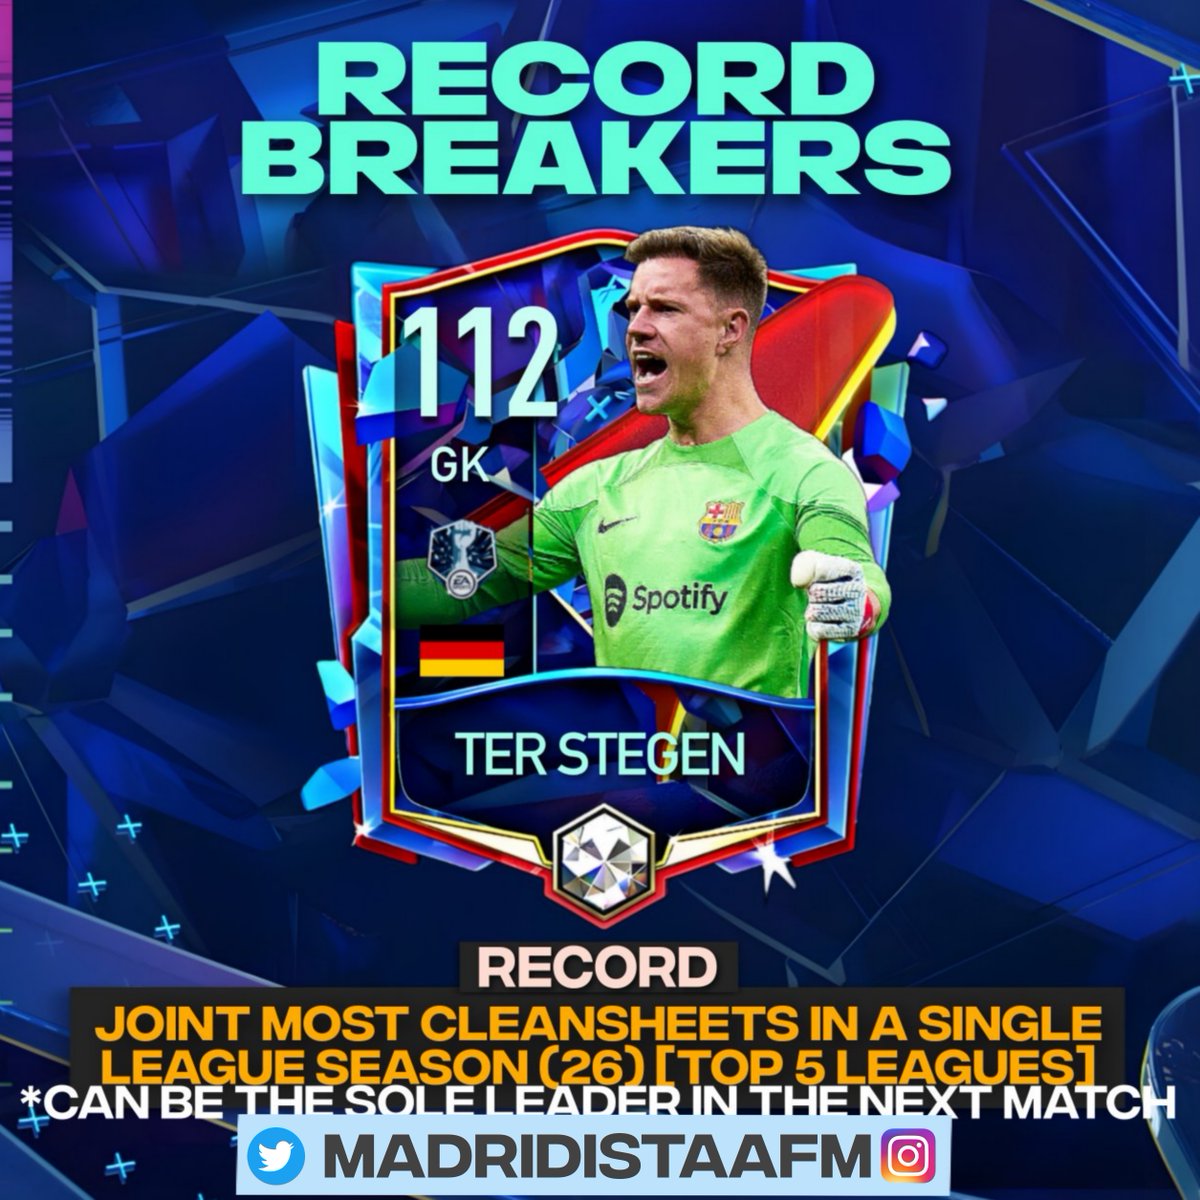 RecordBreakers Concept

Note: This is only a concept. We might not have those players in the event.
Comment more record breakers.

@EAFIFAMOBILE @Nakata767 @RaiHarshit2 @JONALDINHOtm 

Follow for more FM content.

#FIFAMobile #FIFA23 #Recordbreakers #FUT23 #CR7 #Messi 

(1/3)